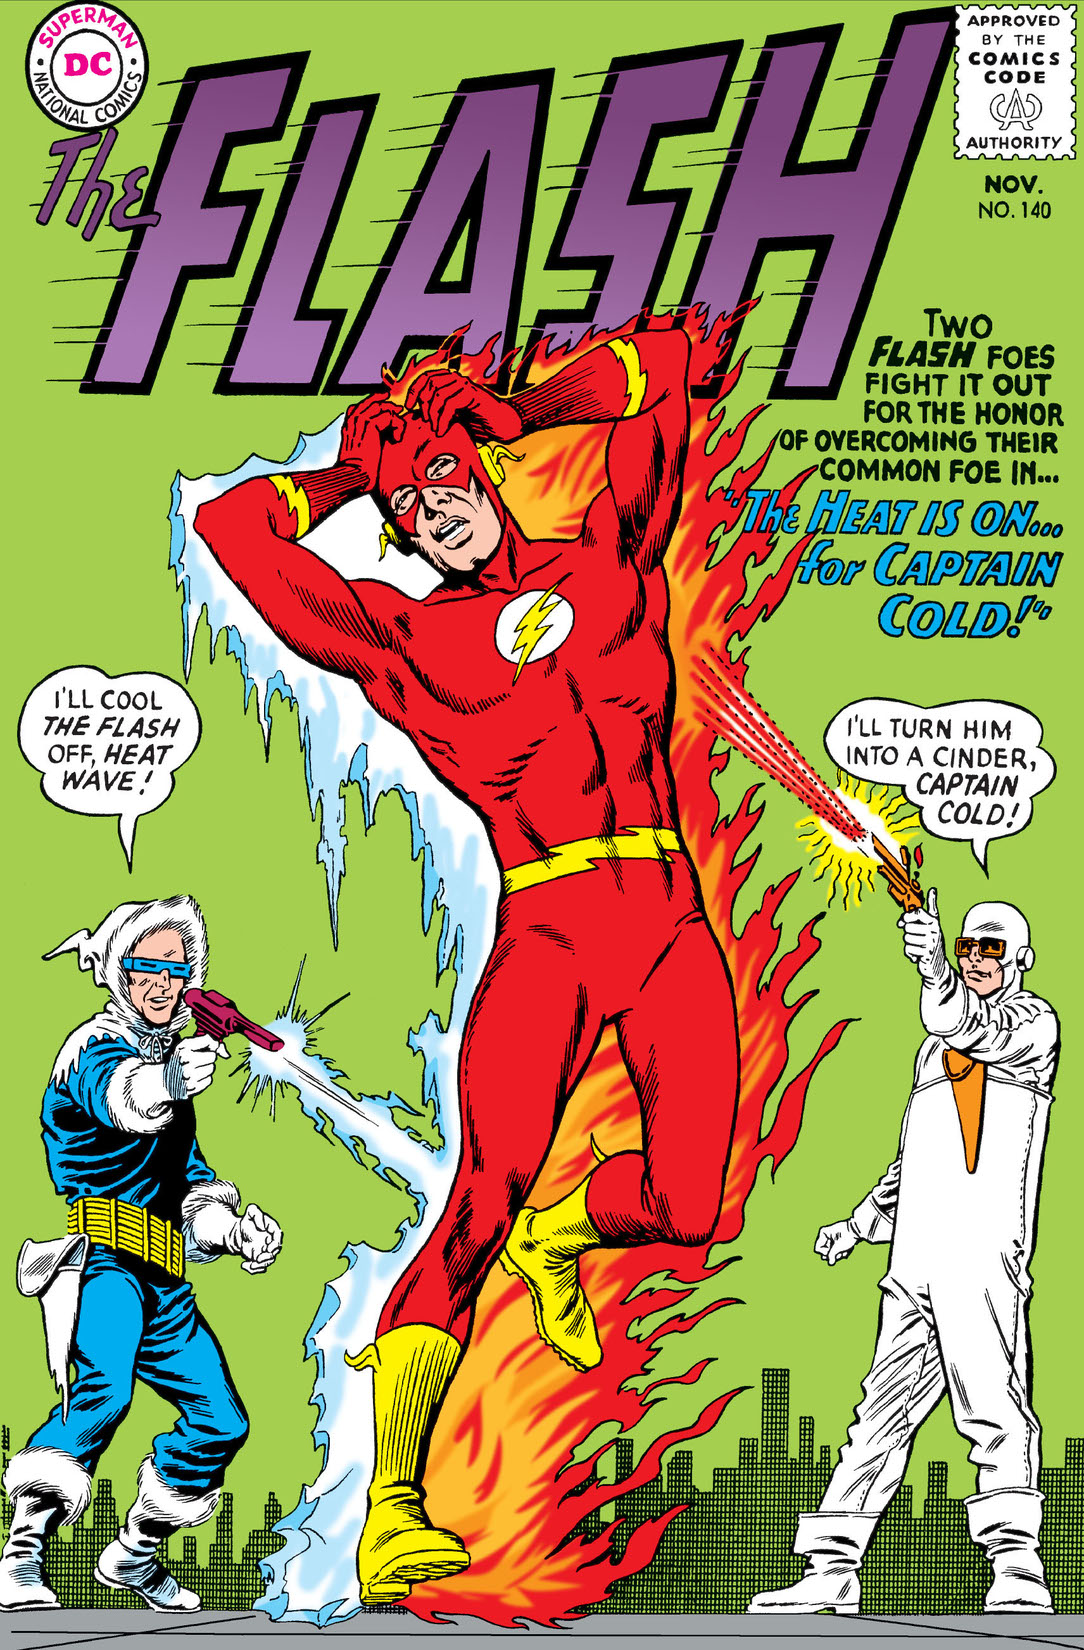 The Flash (1959-) #140 preview images